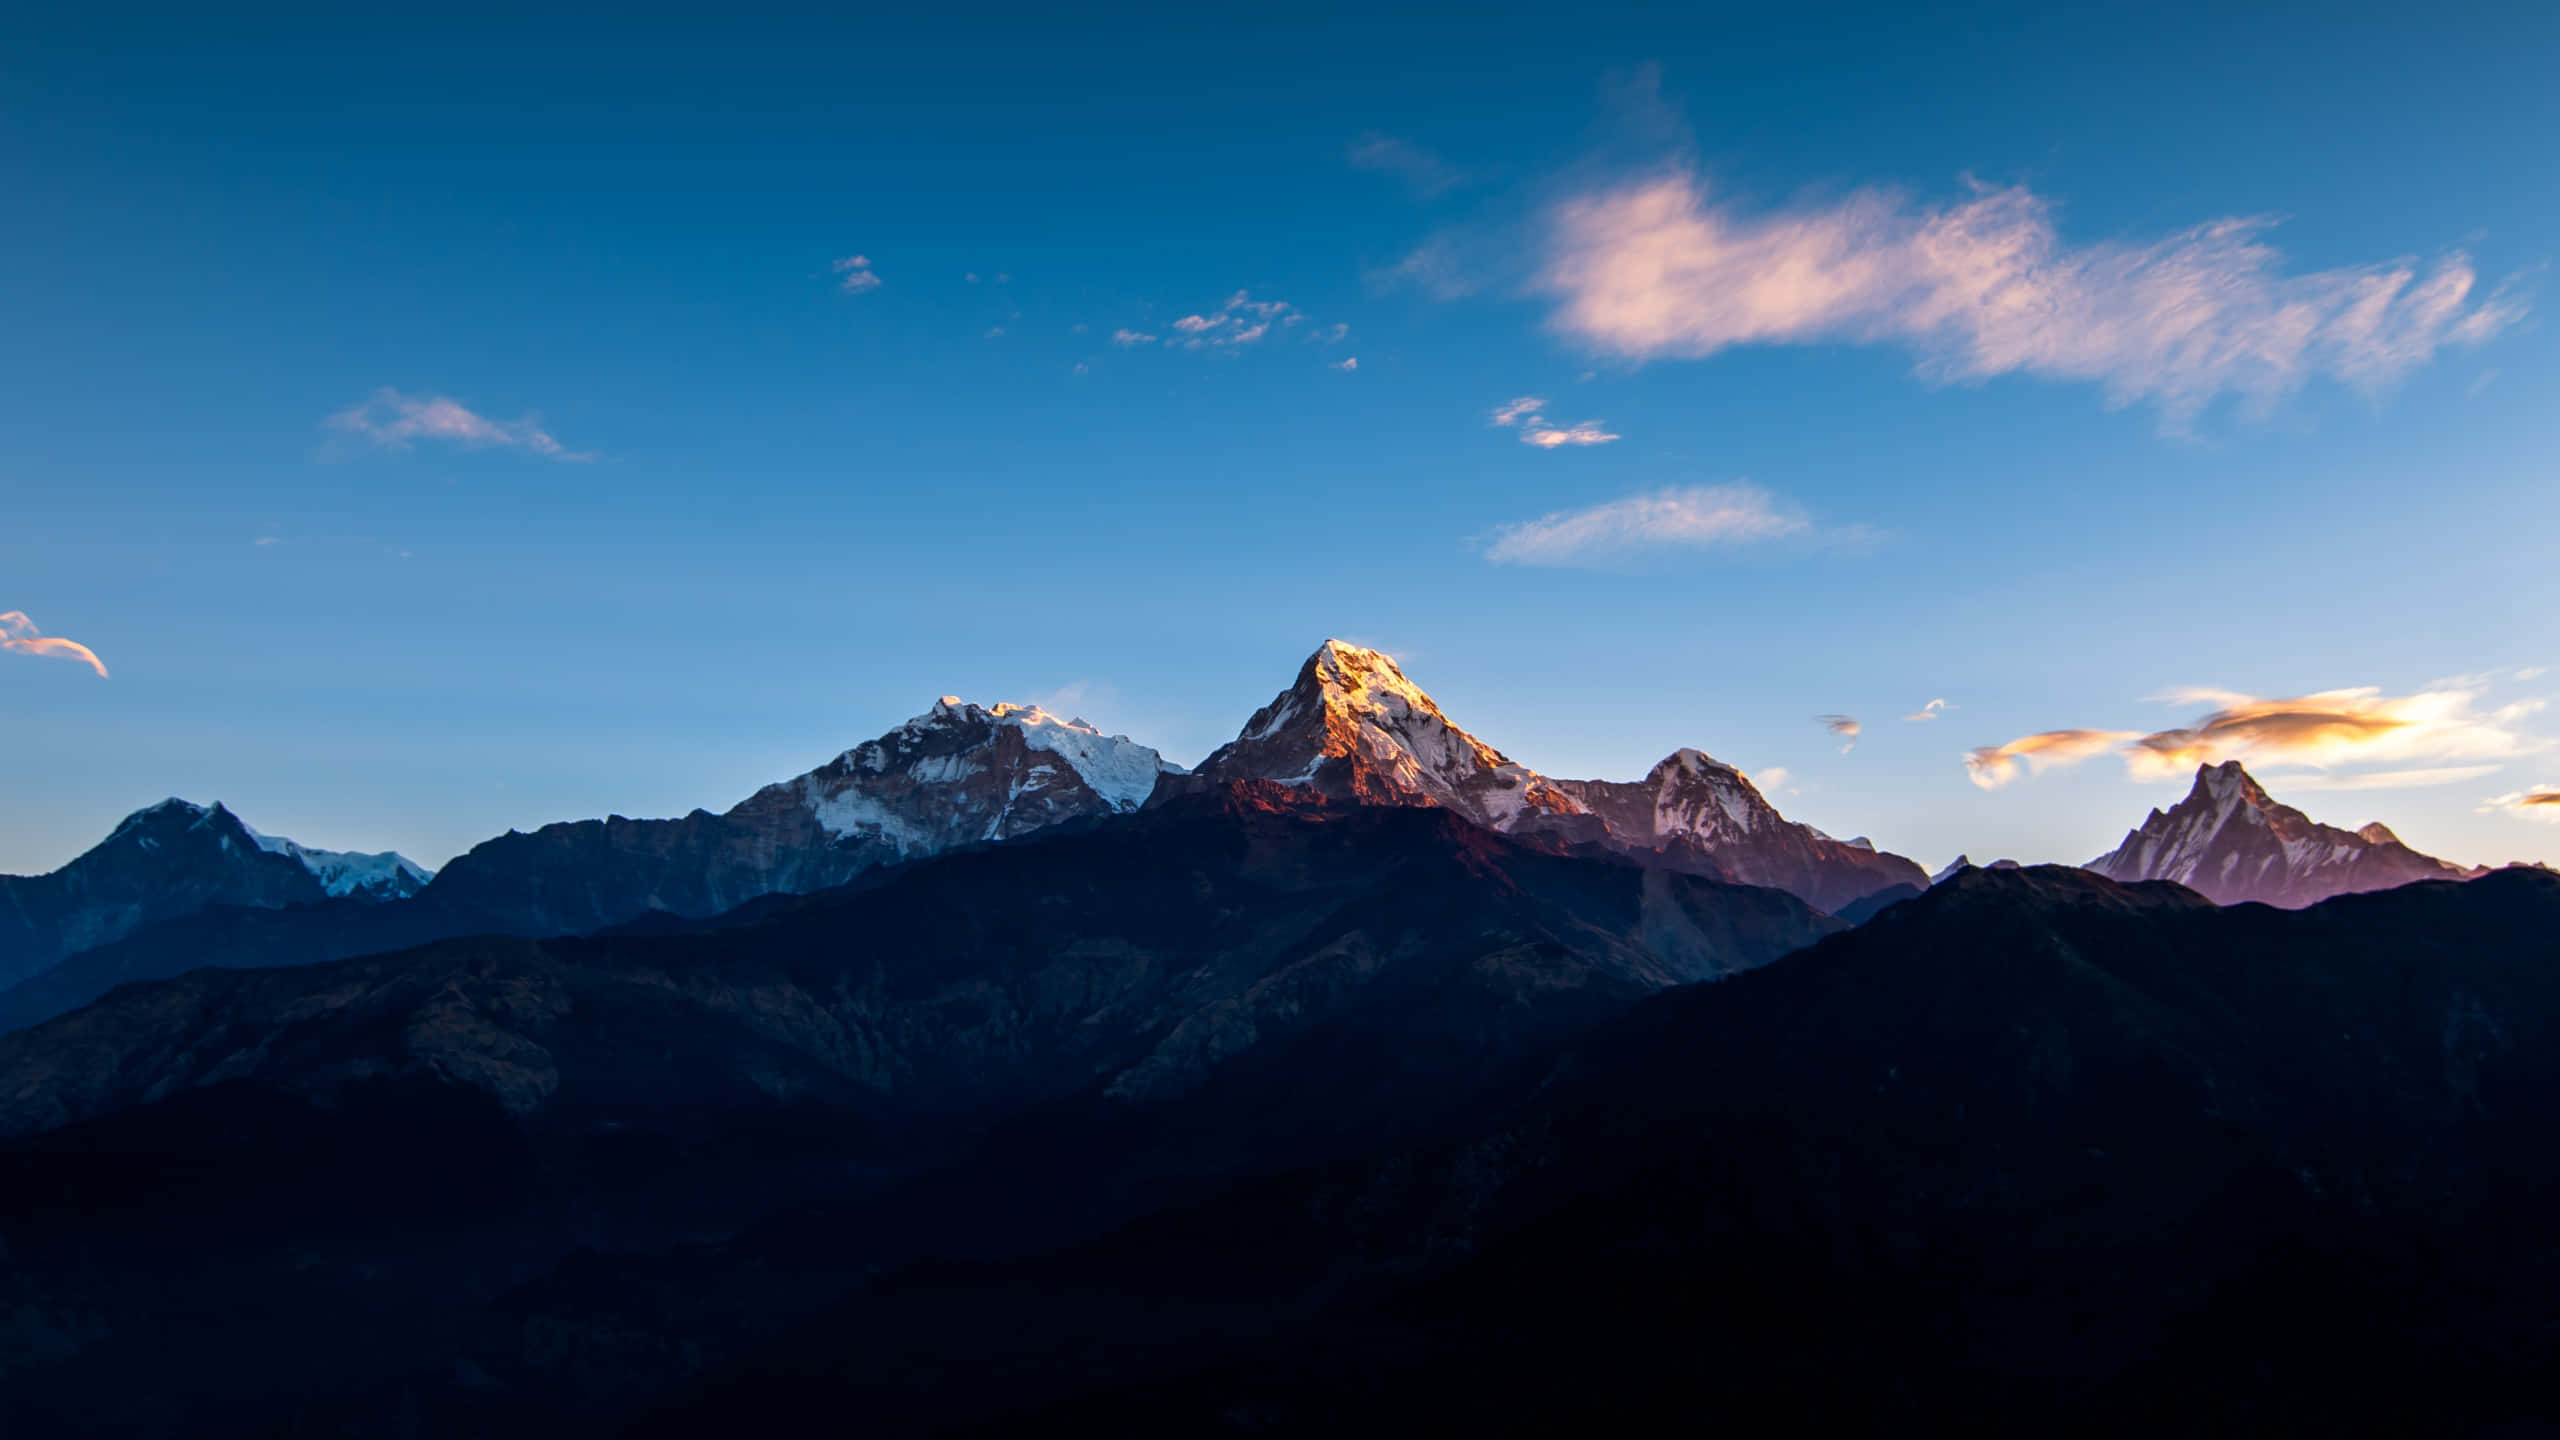 The stunning beauty of the majestic Himalayan Mountains